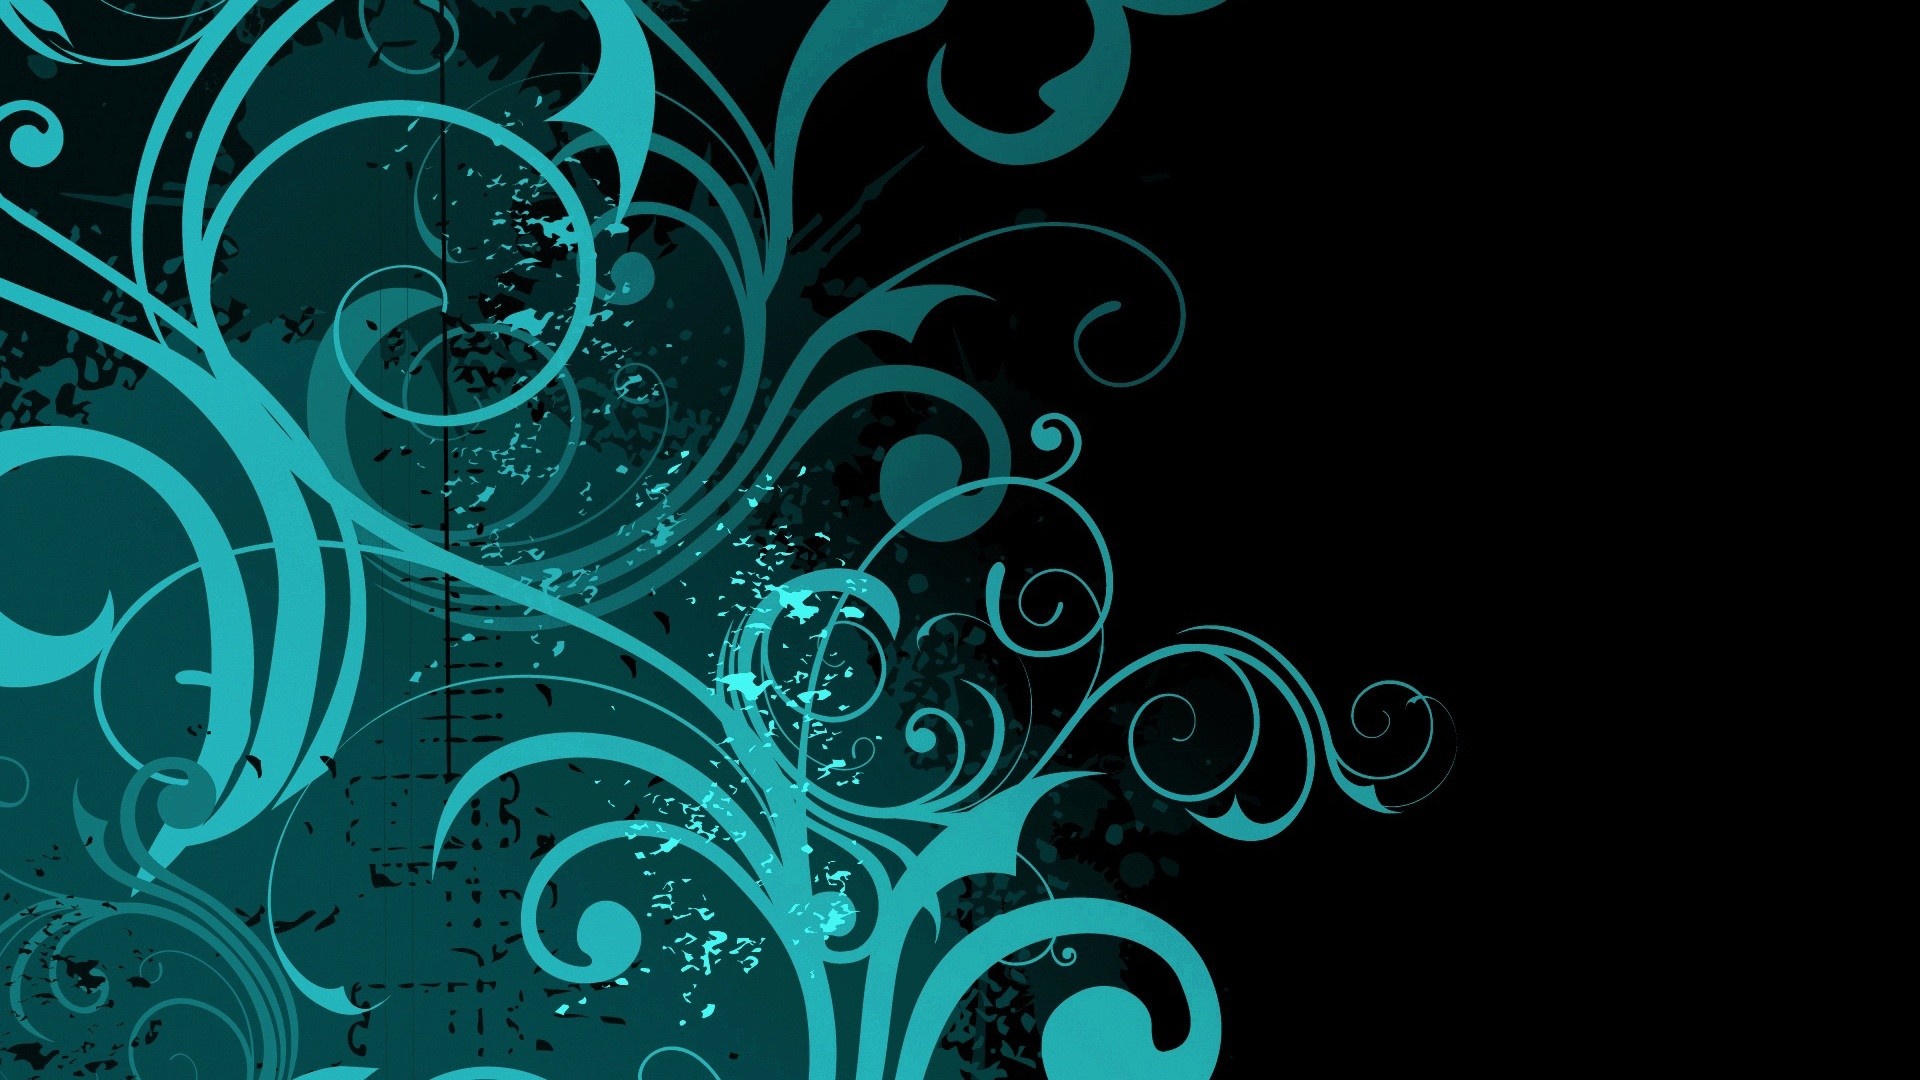 Black and Teal Wallpaper (63+ images)